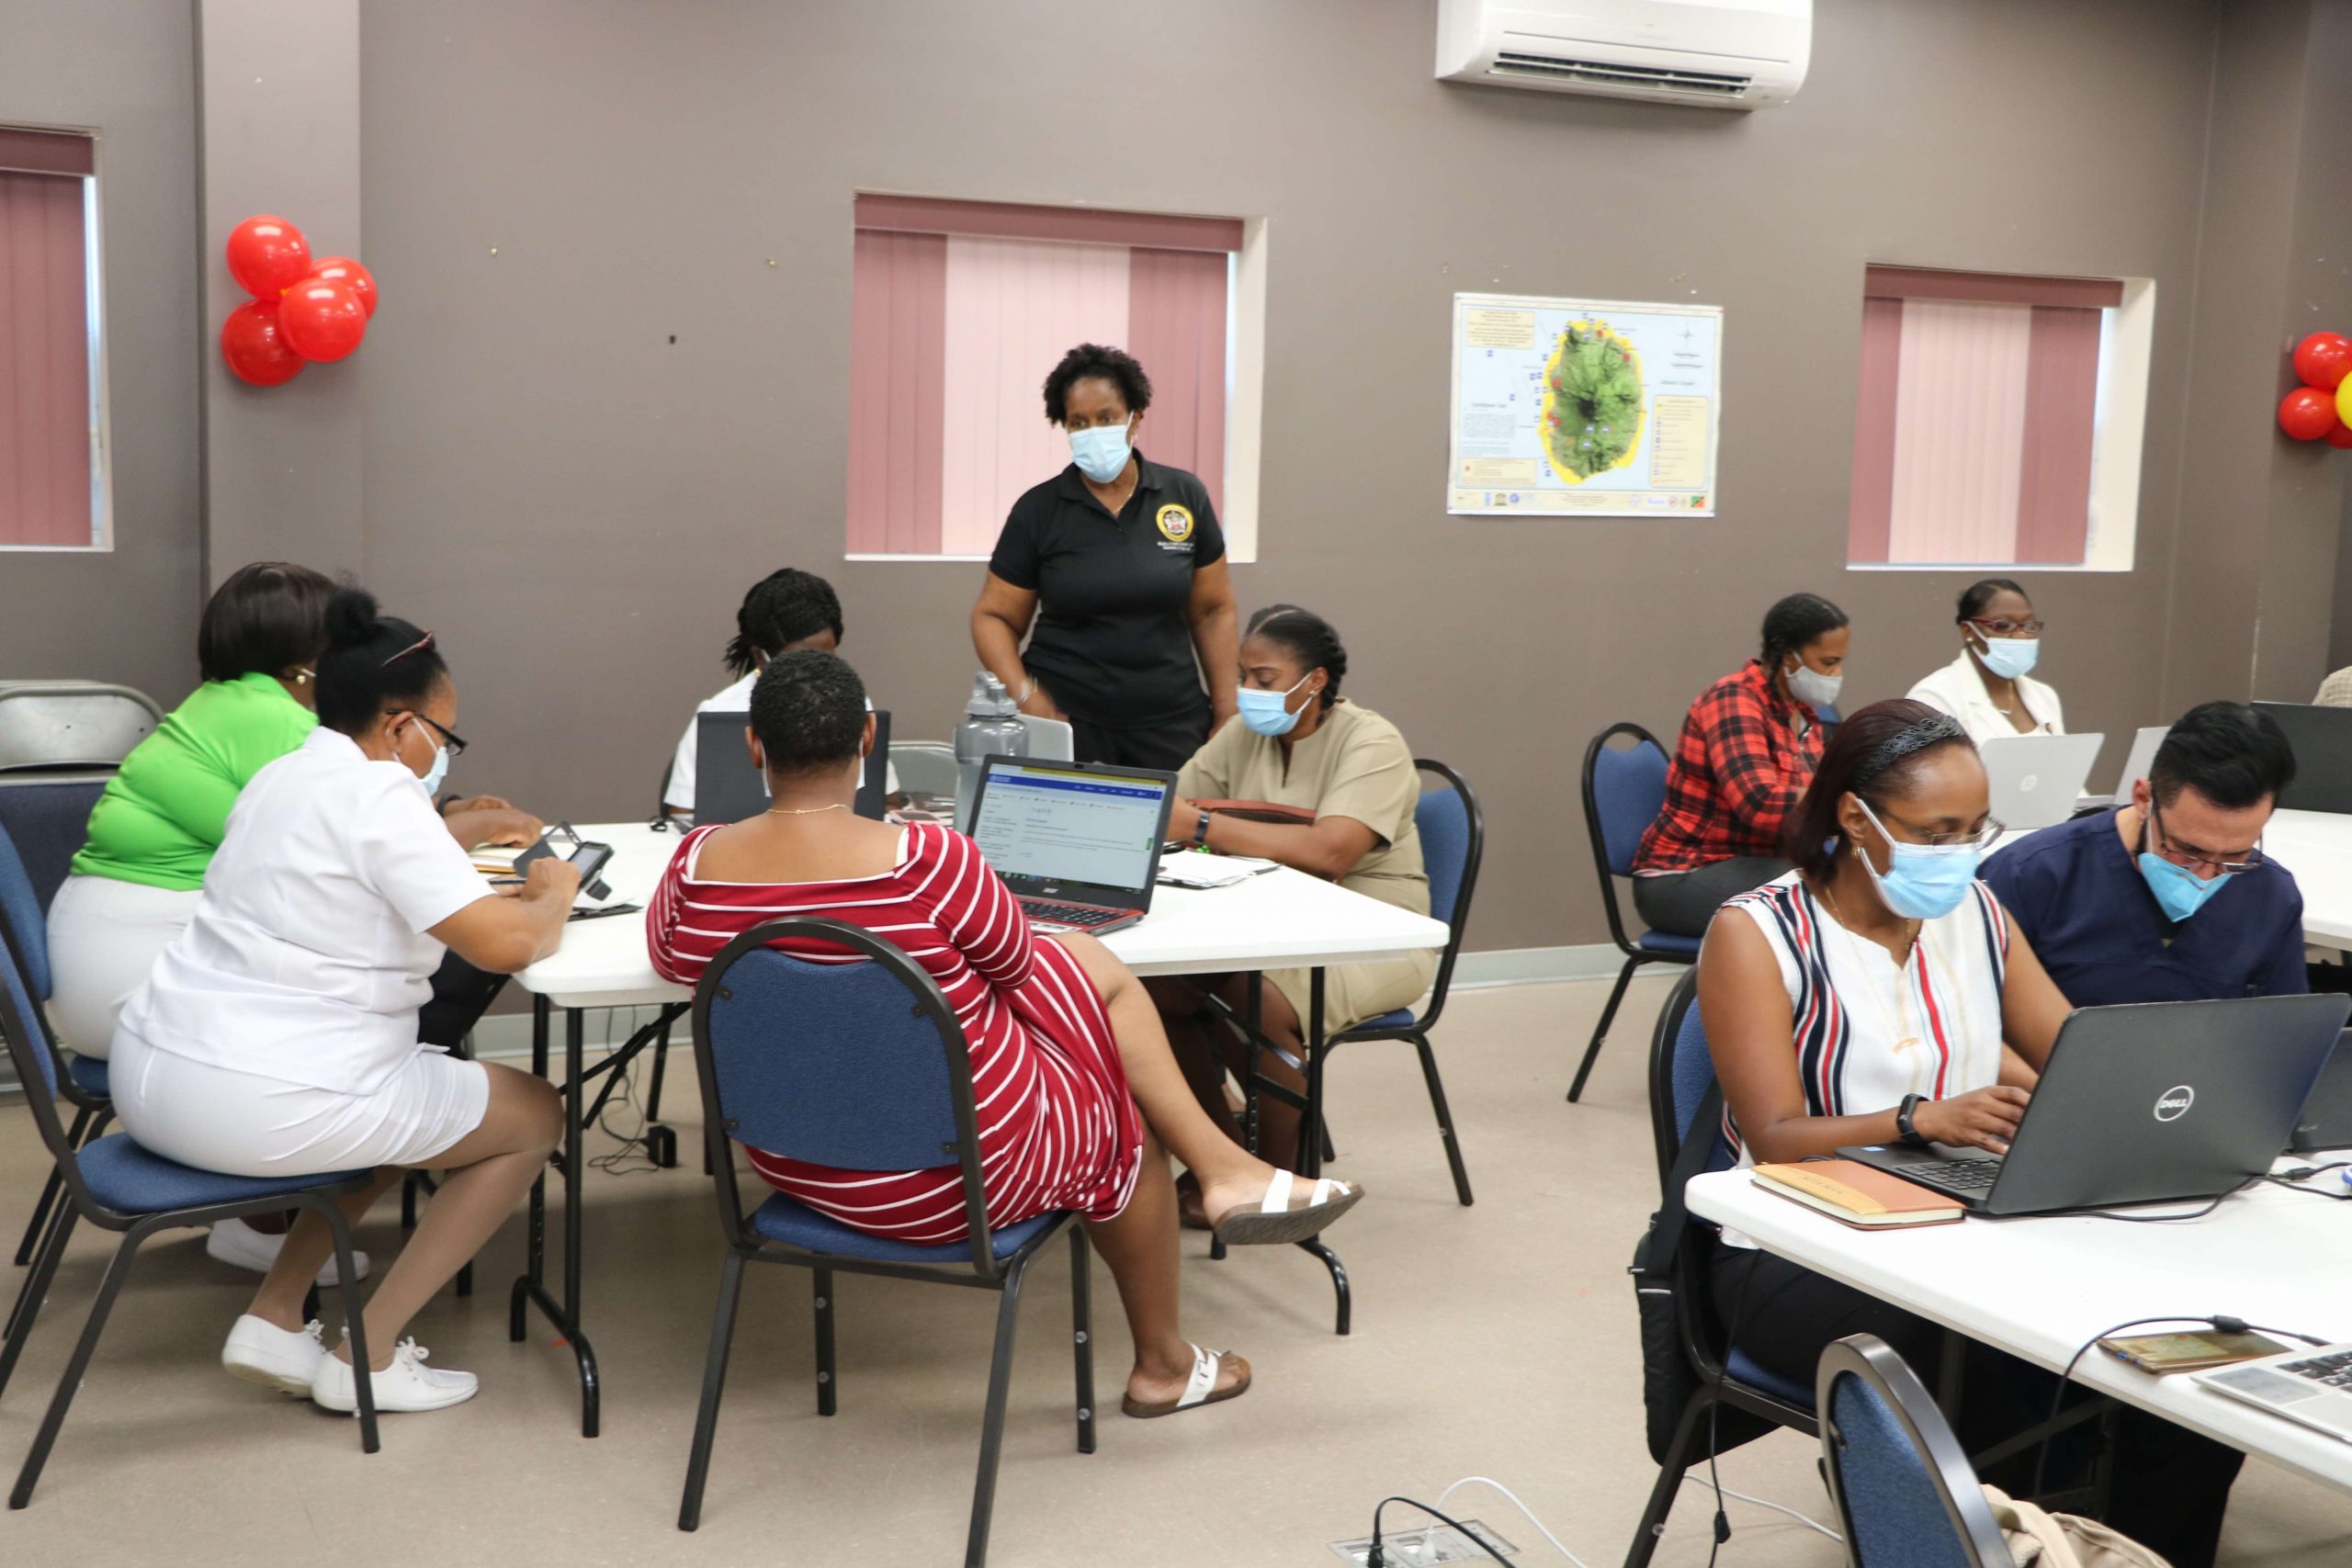 Dr. Judy Nisbett, Chair of the Nevis COVID-19 Task Force (standing) during the training session at the Disaster Management Department’s conference room on February 19, 2021, with health professionals on Nevis in preparation for administering the AstraZeneca-Oxford vaccine in the fight against COVID-19